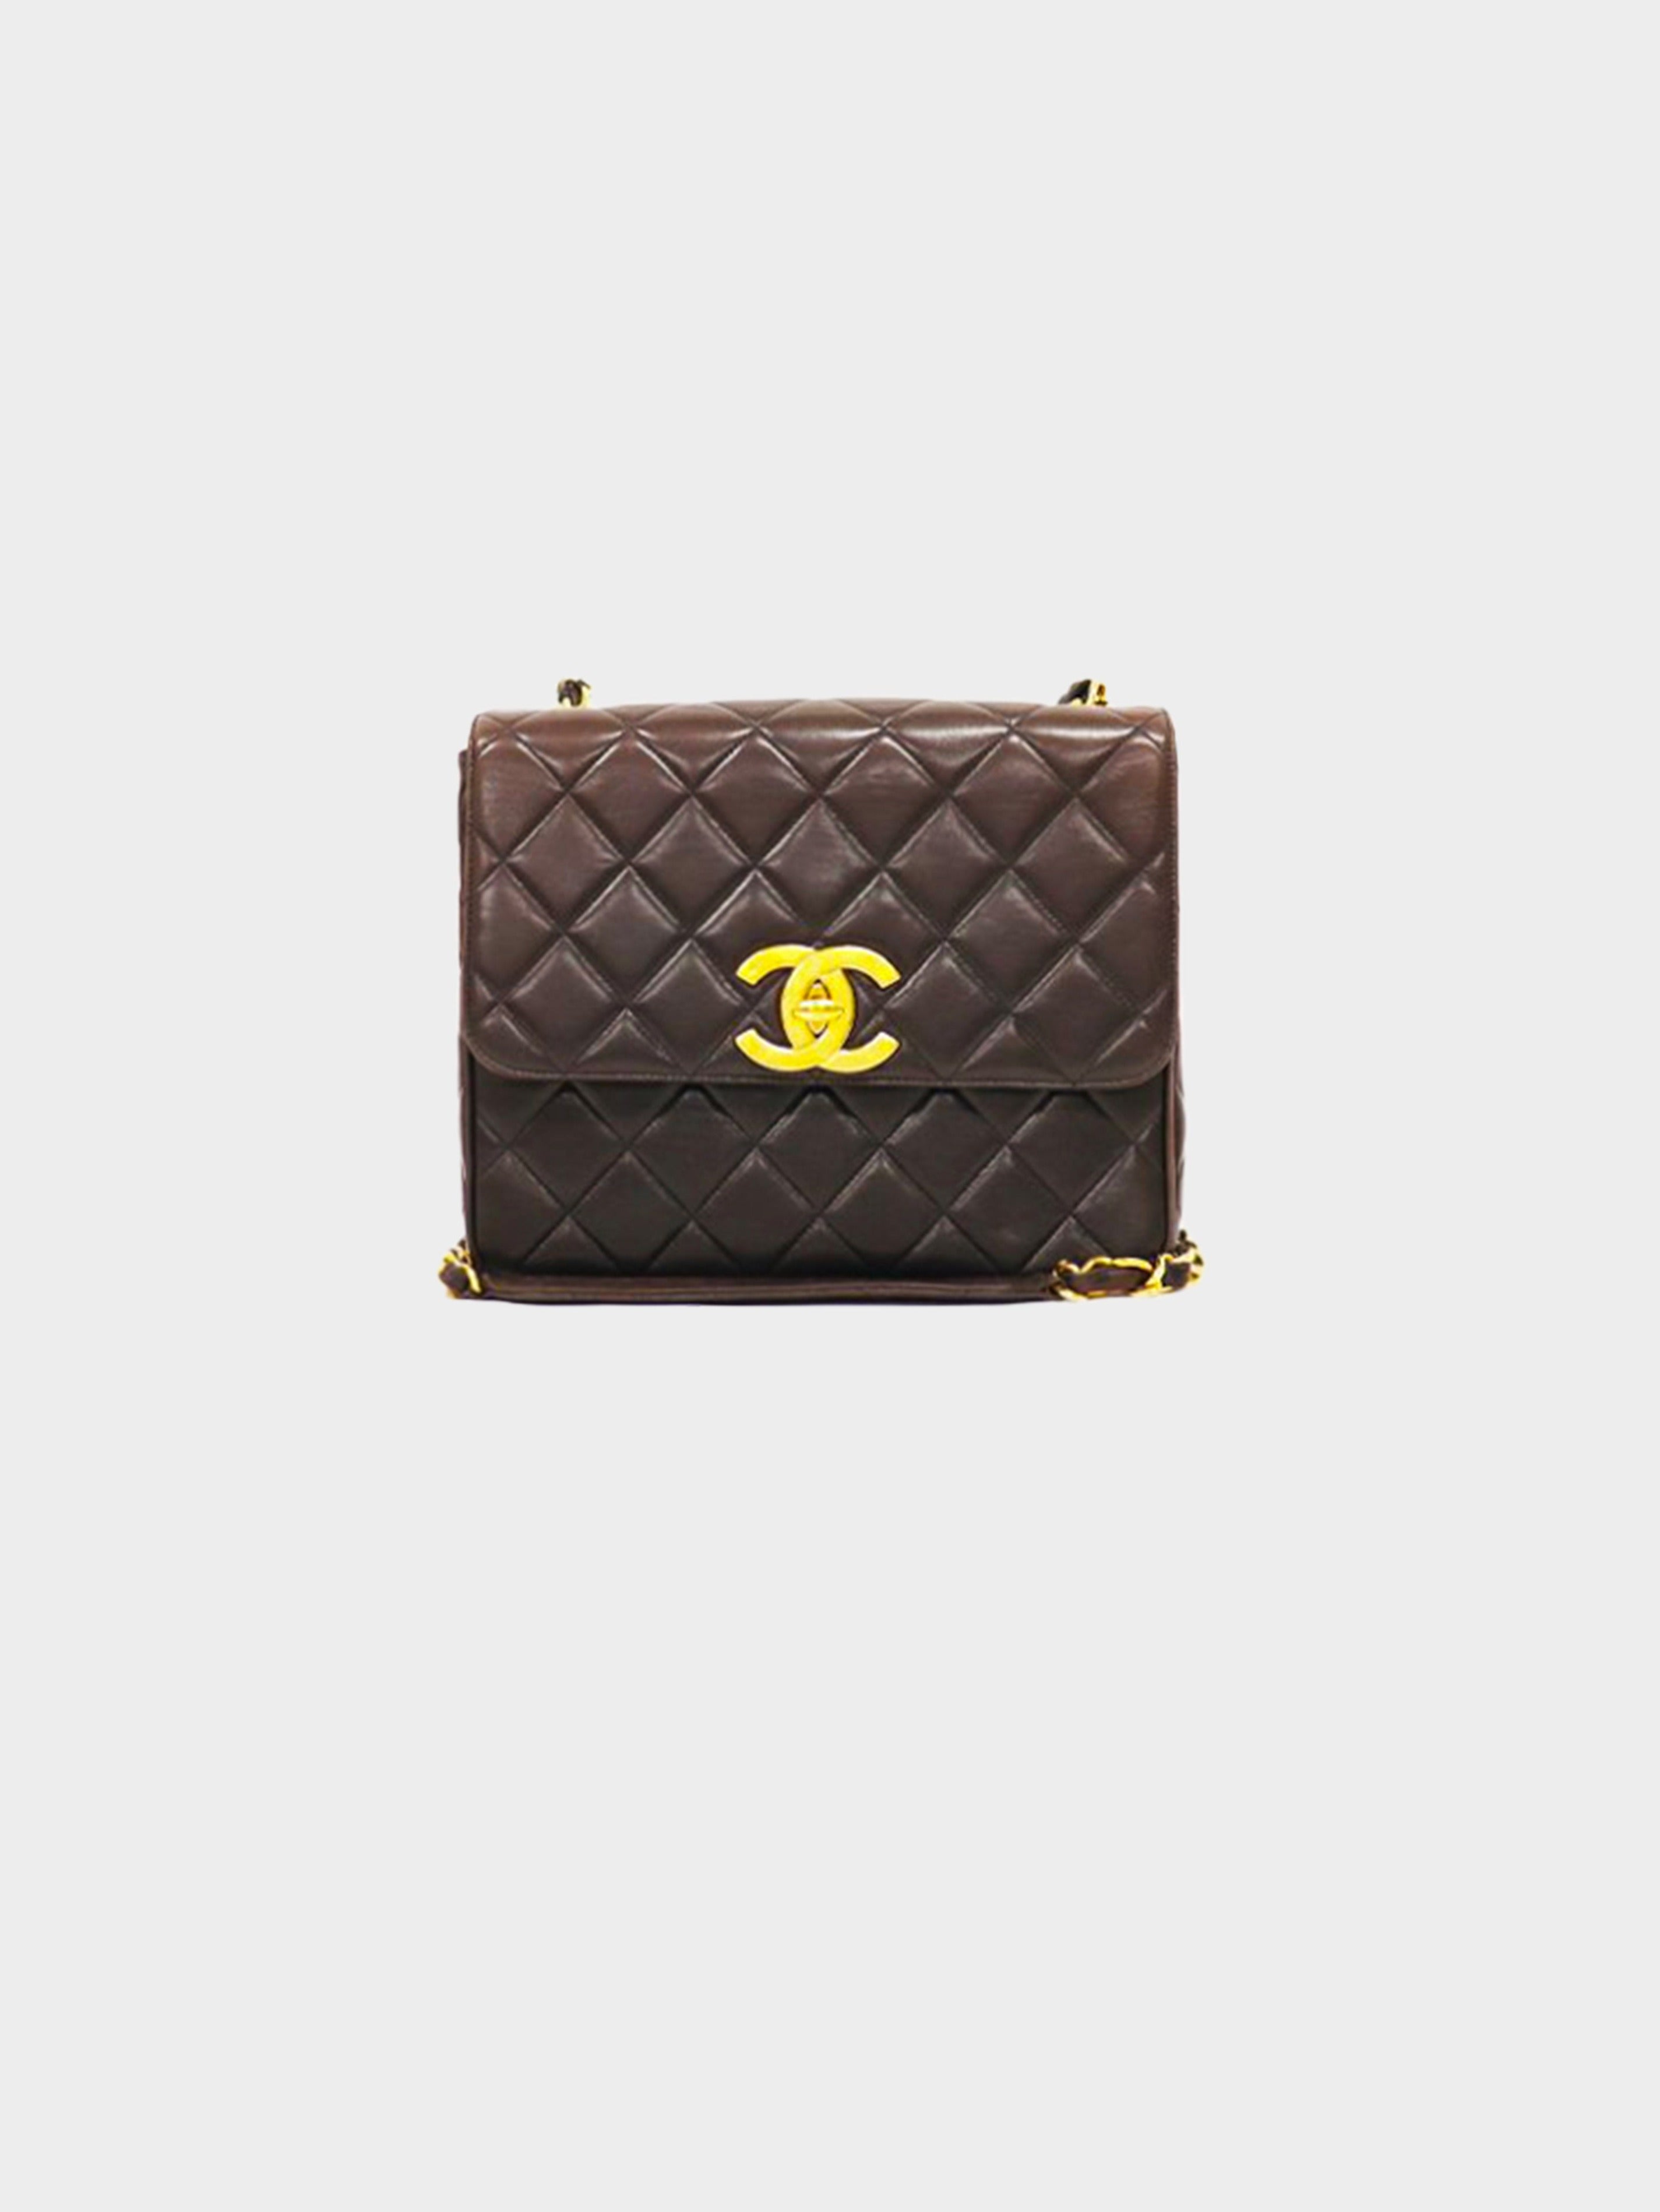 Quilted Twist Lock Flap Square Bag, Chain Strap Crossbody Bag